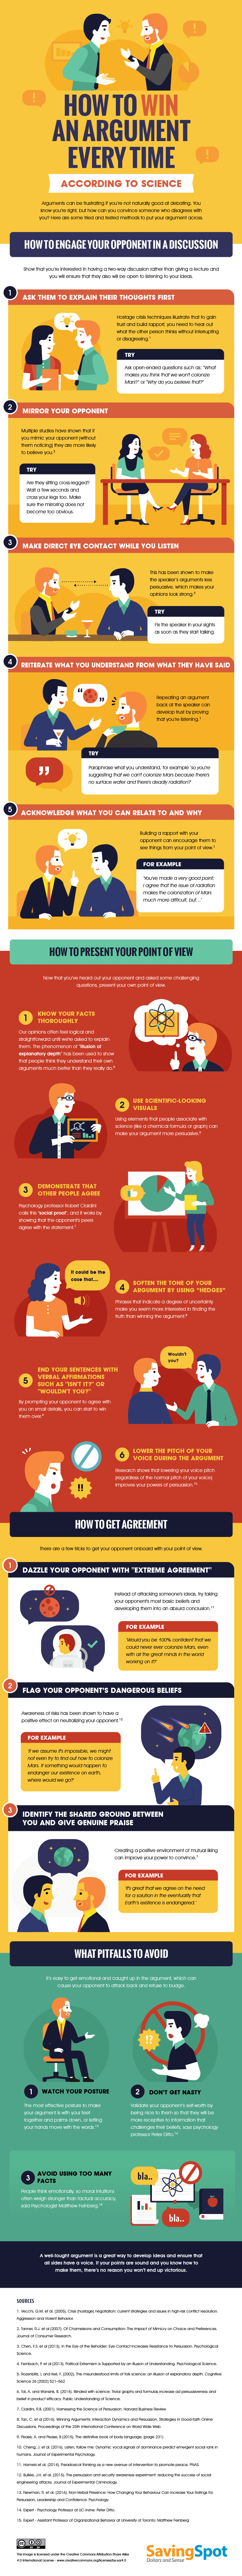 How to Win an Argument Every Time (According to Science)